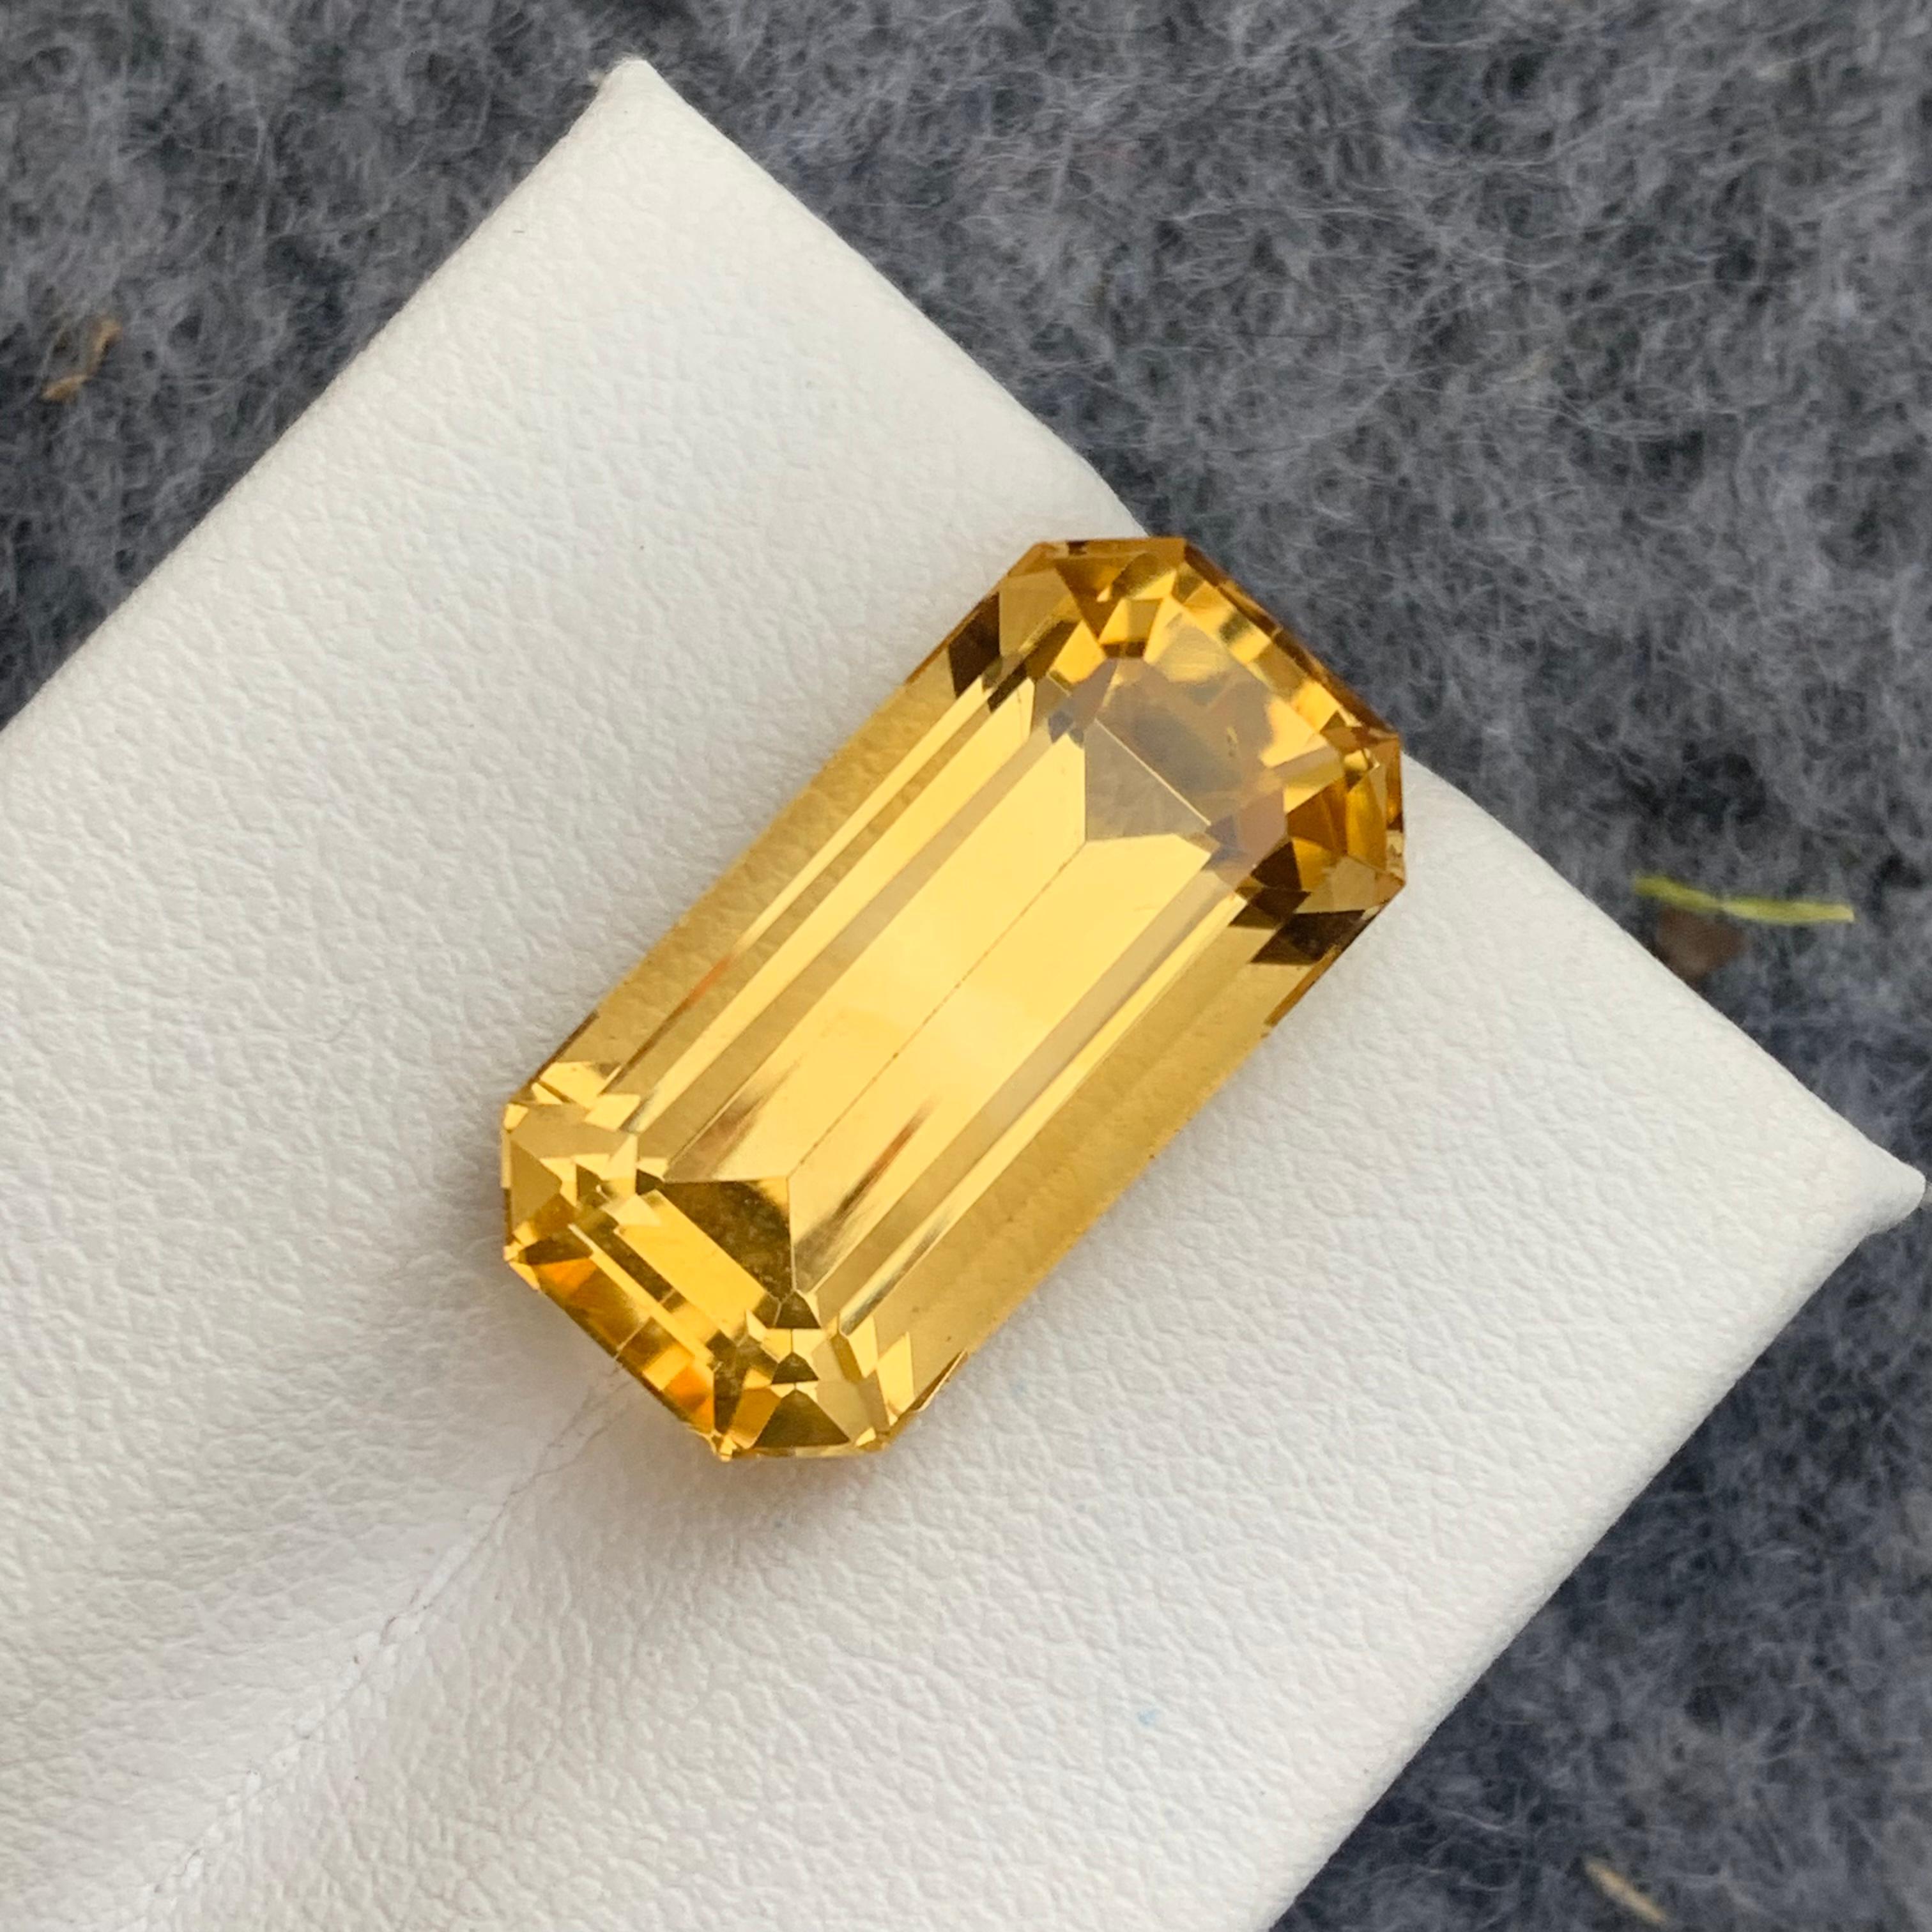 Faceted Citrine
Weight : 11.65 Carats
Dimensions : 18.5x9.5x8.8 Mm
Clarity : Eye Clean 
Origin : Brazil
Color: Yellow 
Shape: Emerald 
Certificate: On Demand
Month: November
.
The Many Healing Properties of Citrine
Increase Optimism, And Sunny